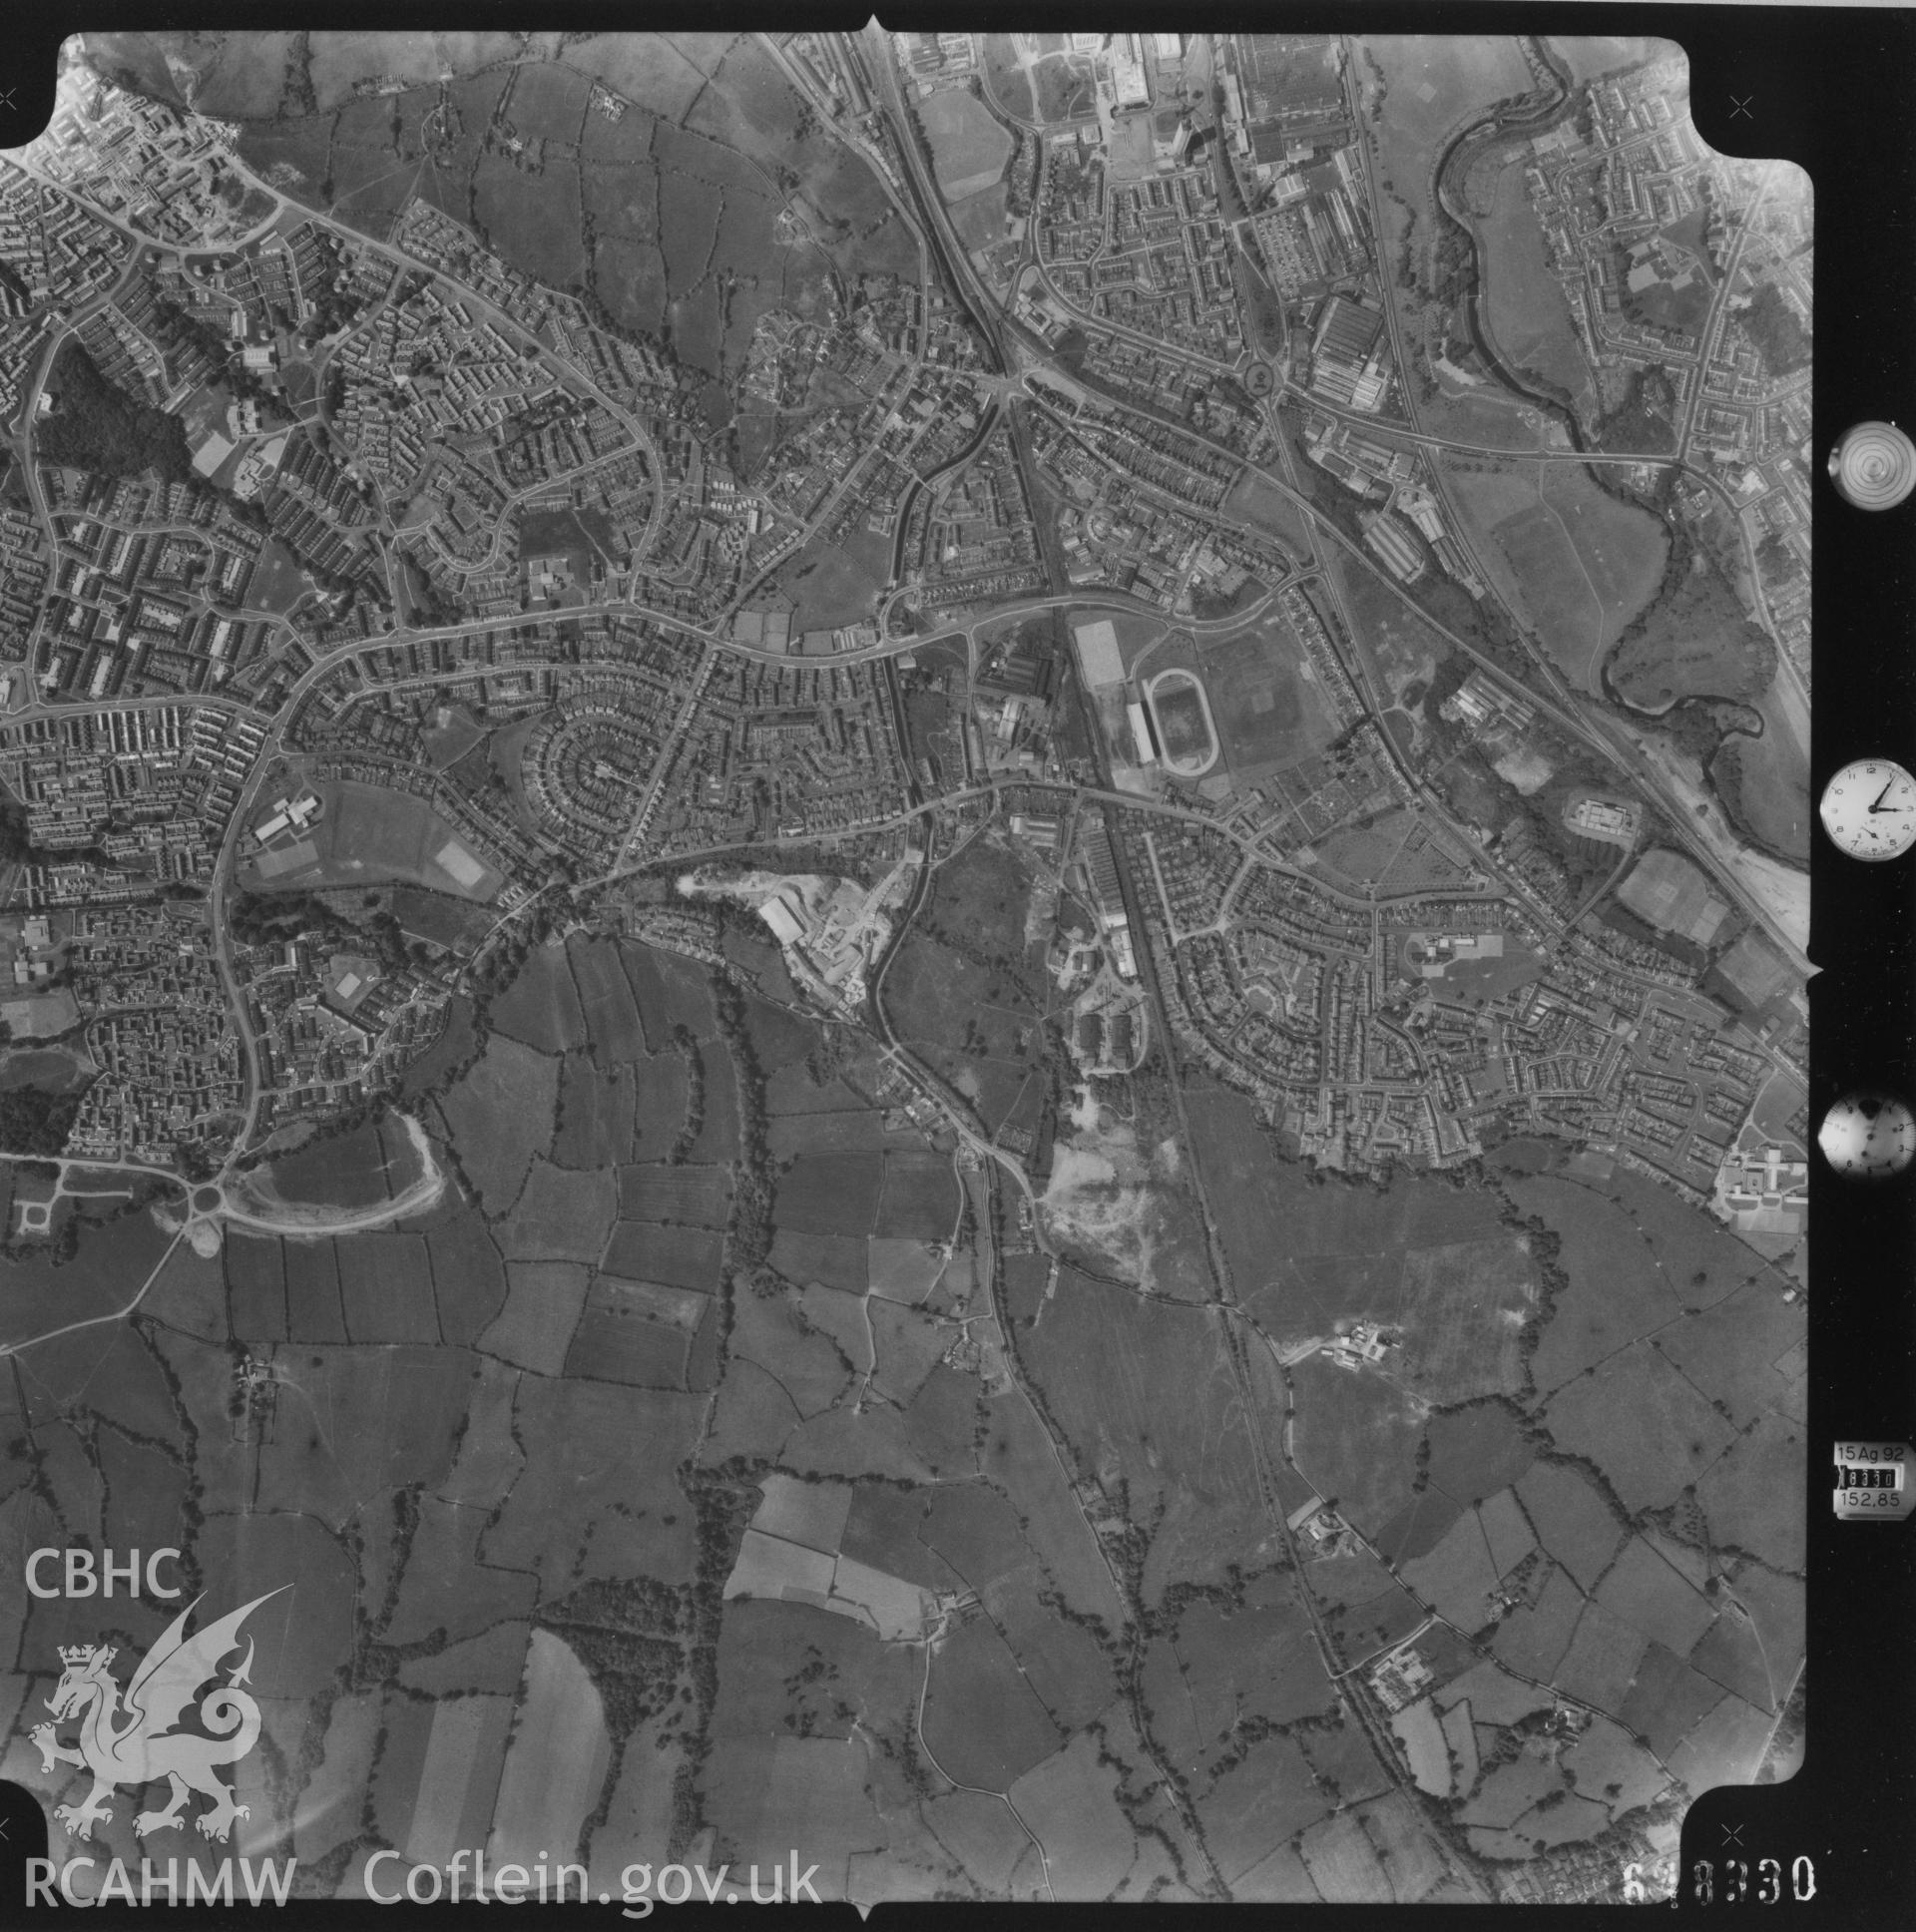 Aerial photograph of Cwmbran, taken in 1971. Included as part of Archaeology Wales' desk based assessment of former Llantarnam Community Primary School, Croeswen, Oakfield, Cwmbran, conducted in 2017.